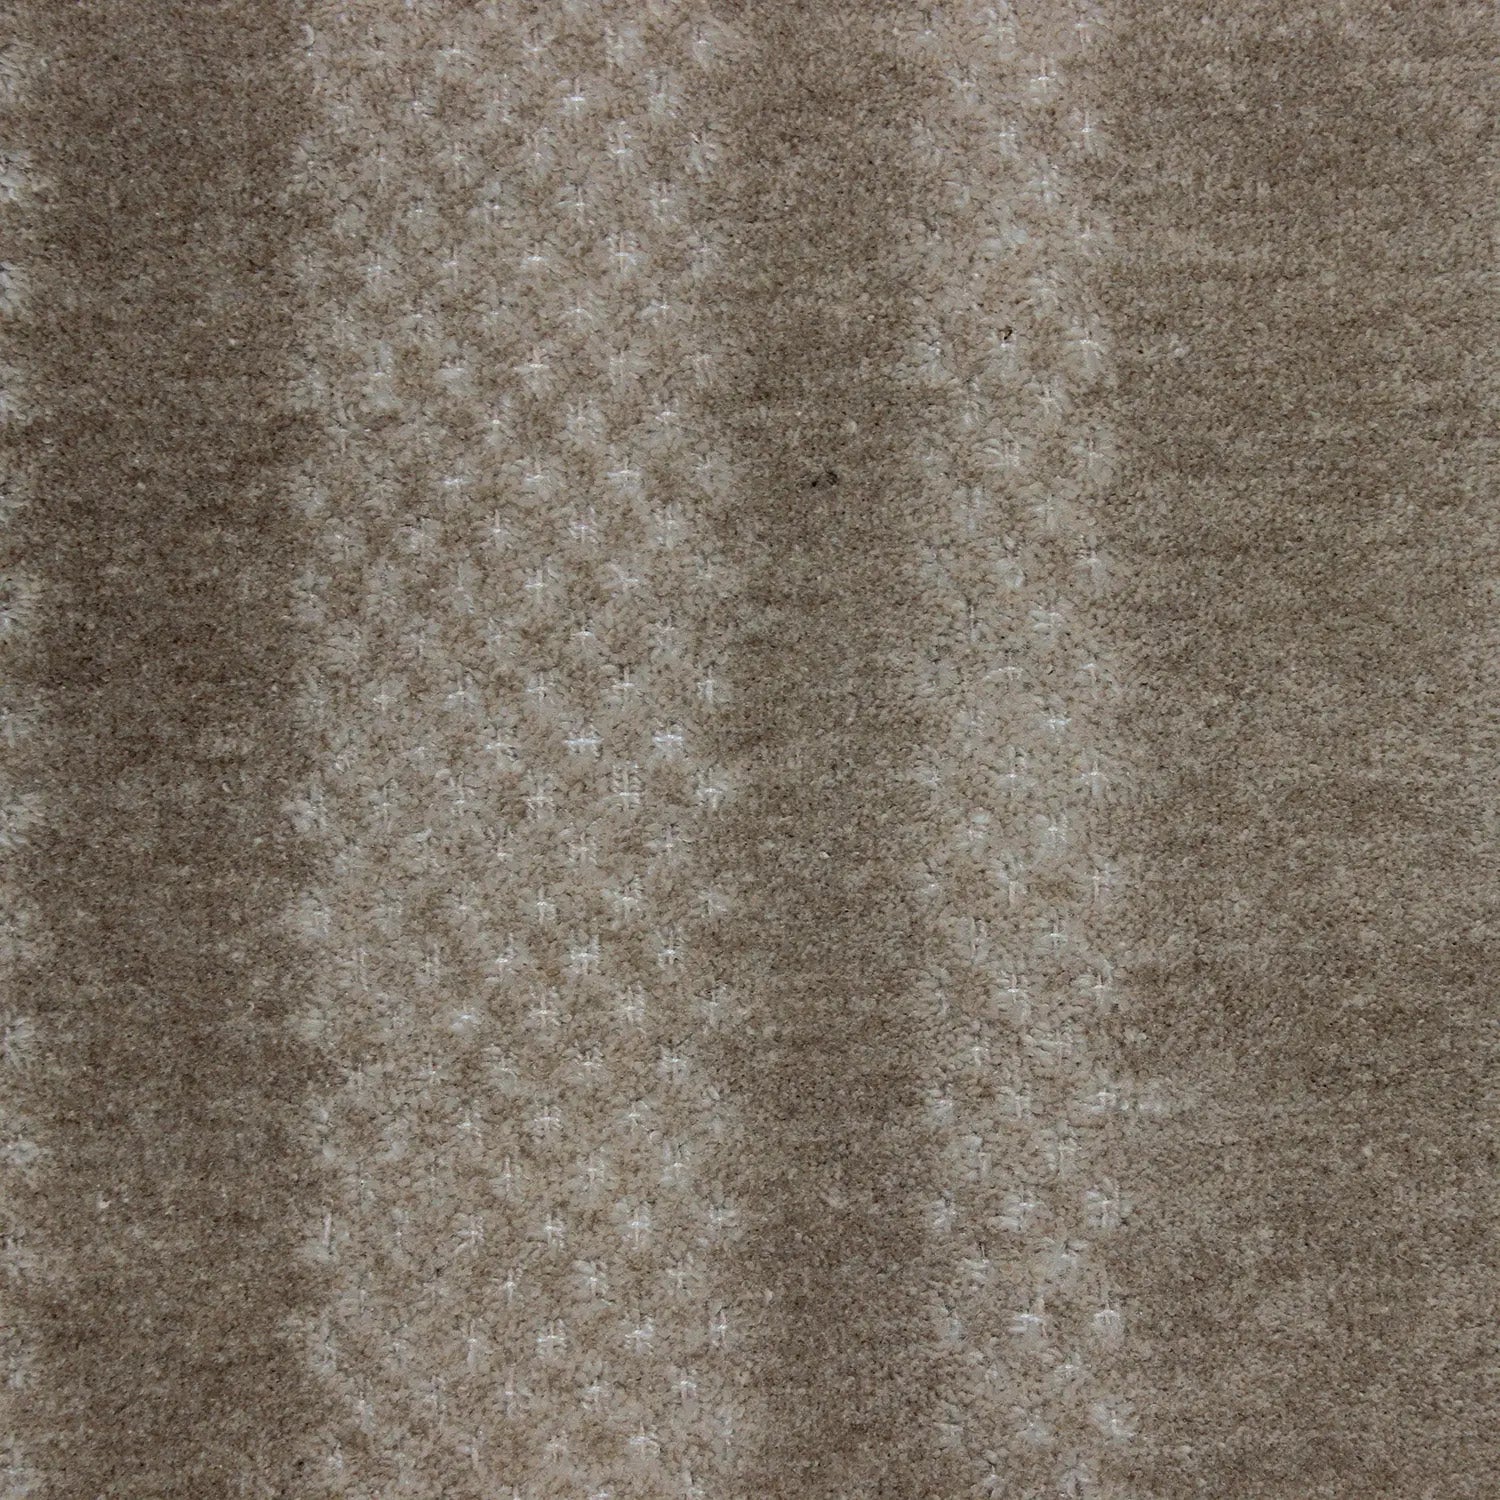 Lacey Plain Beige Wool Rug - Rugs - Rugs a Million